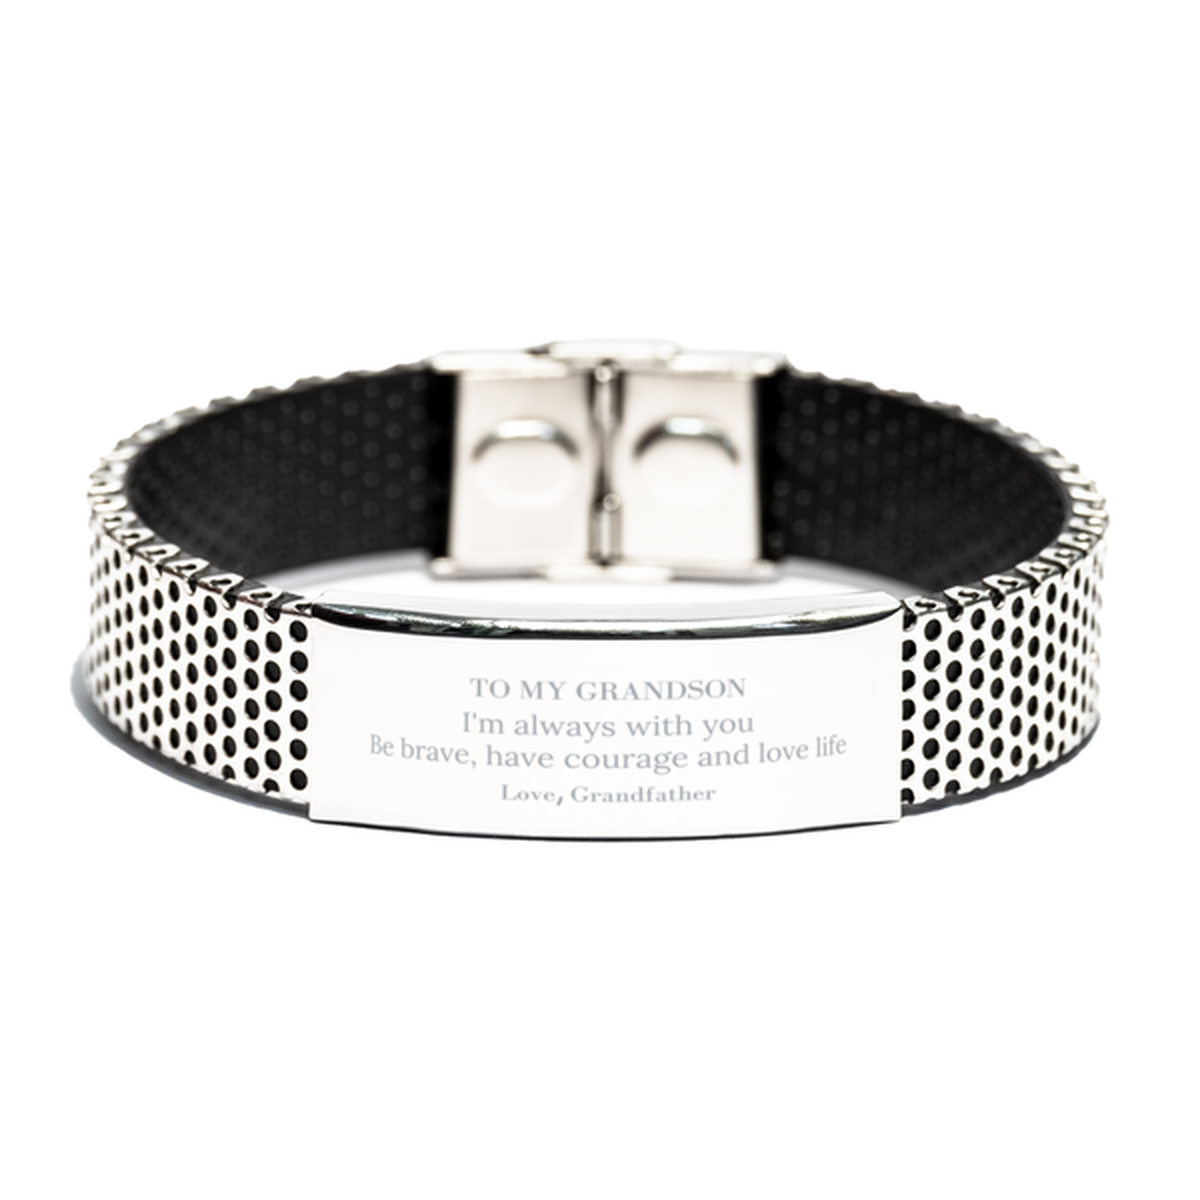 To My Grandson Gifts from Grandfather, Unique Stainless Steel Bracelet Inspirational Christmas Birthday Graduation Gifts for Grandson I'm always with you. Be brave, have courage and love life. Love, Grandfather